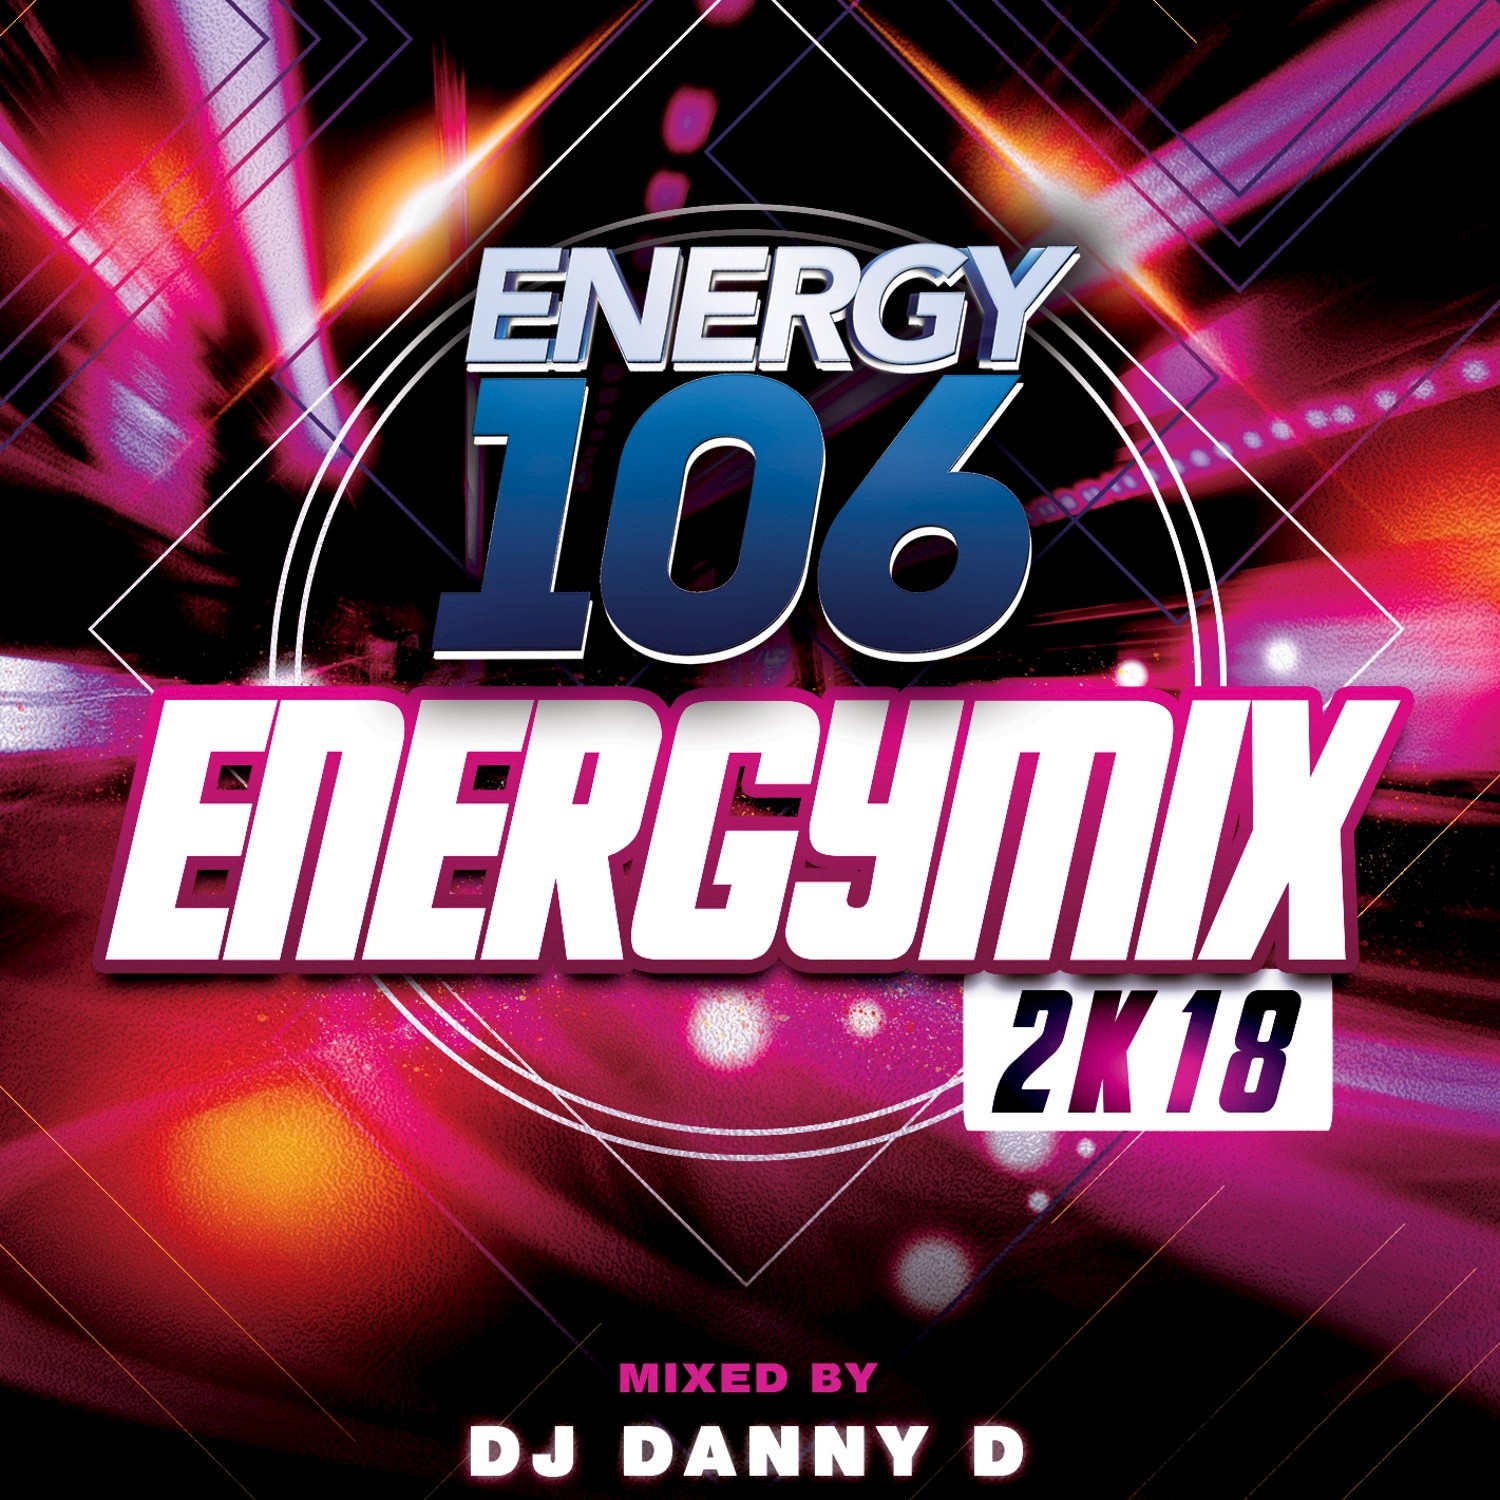 Energymix 2K18 (Presented by Energy106)